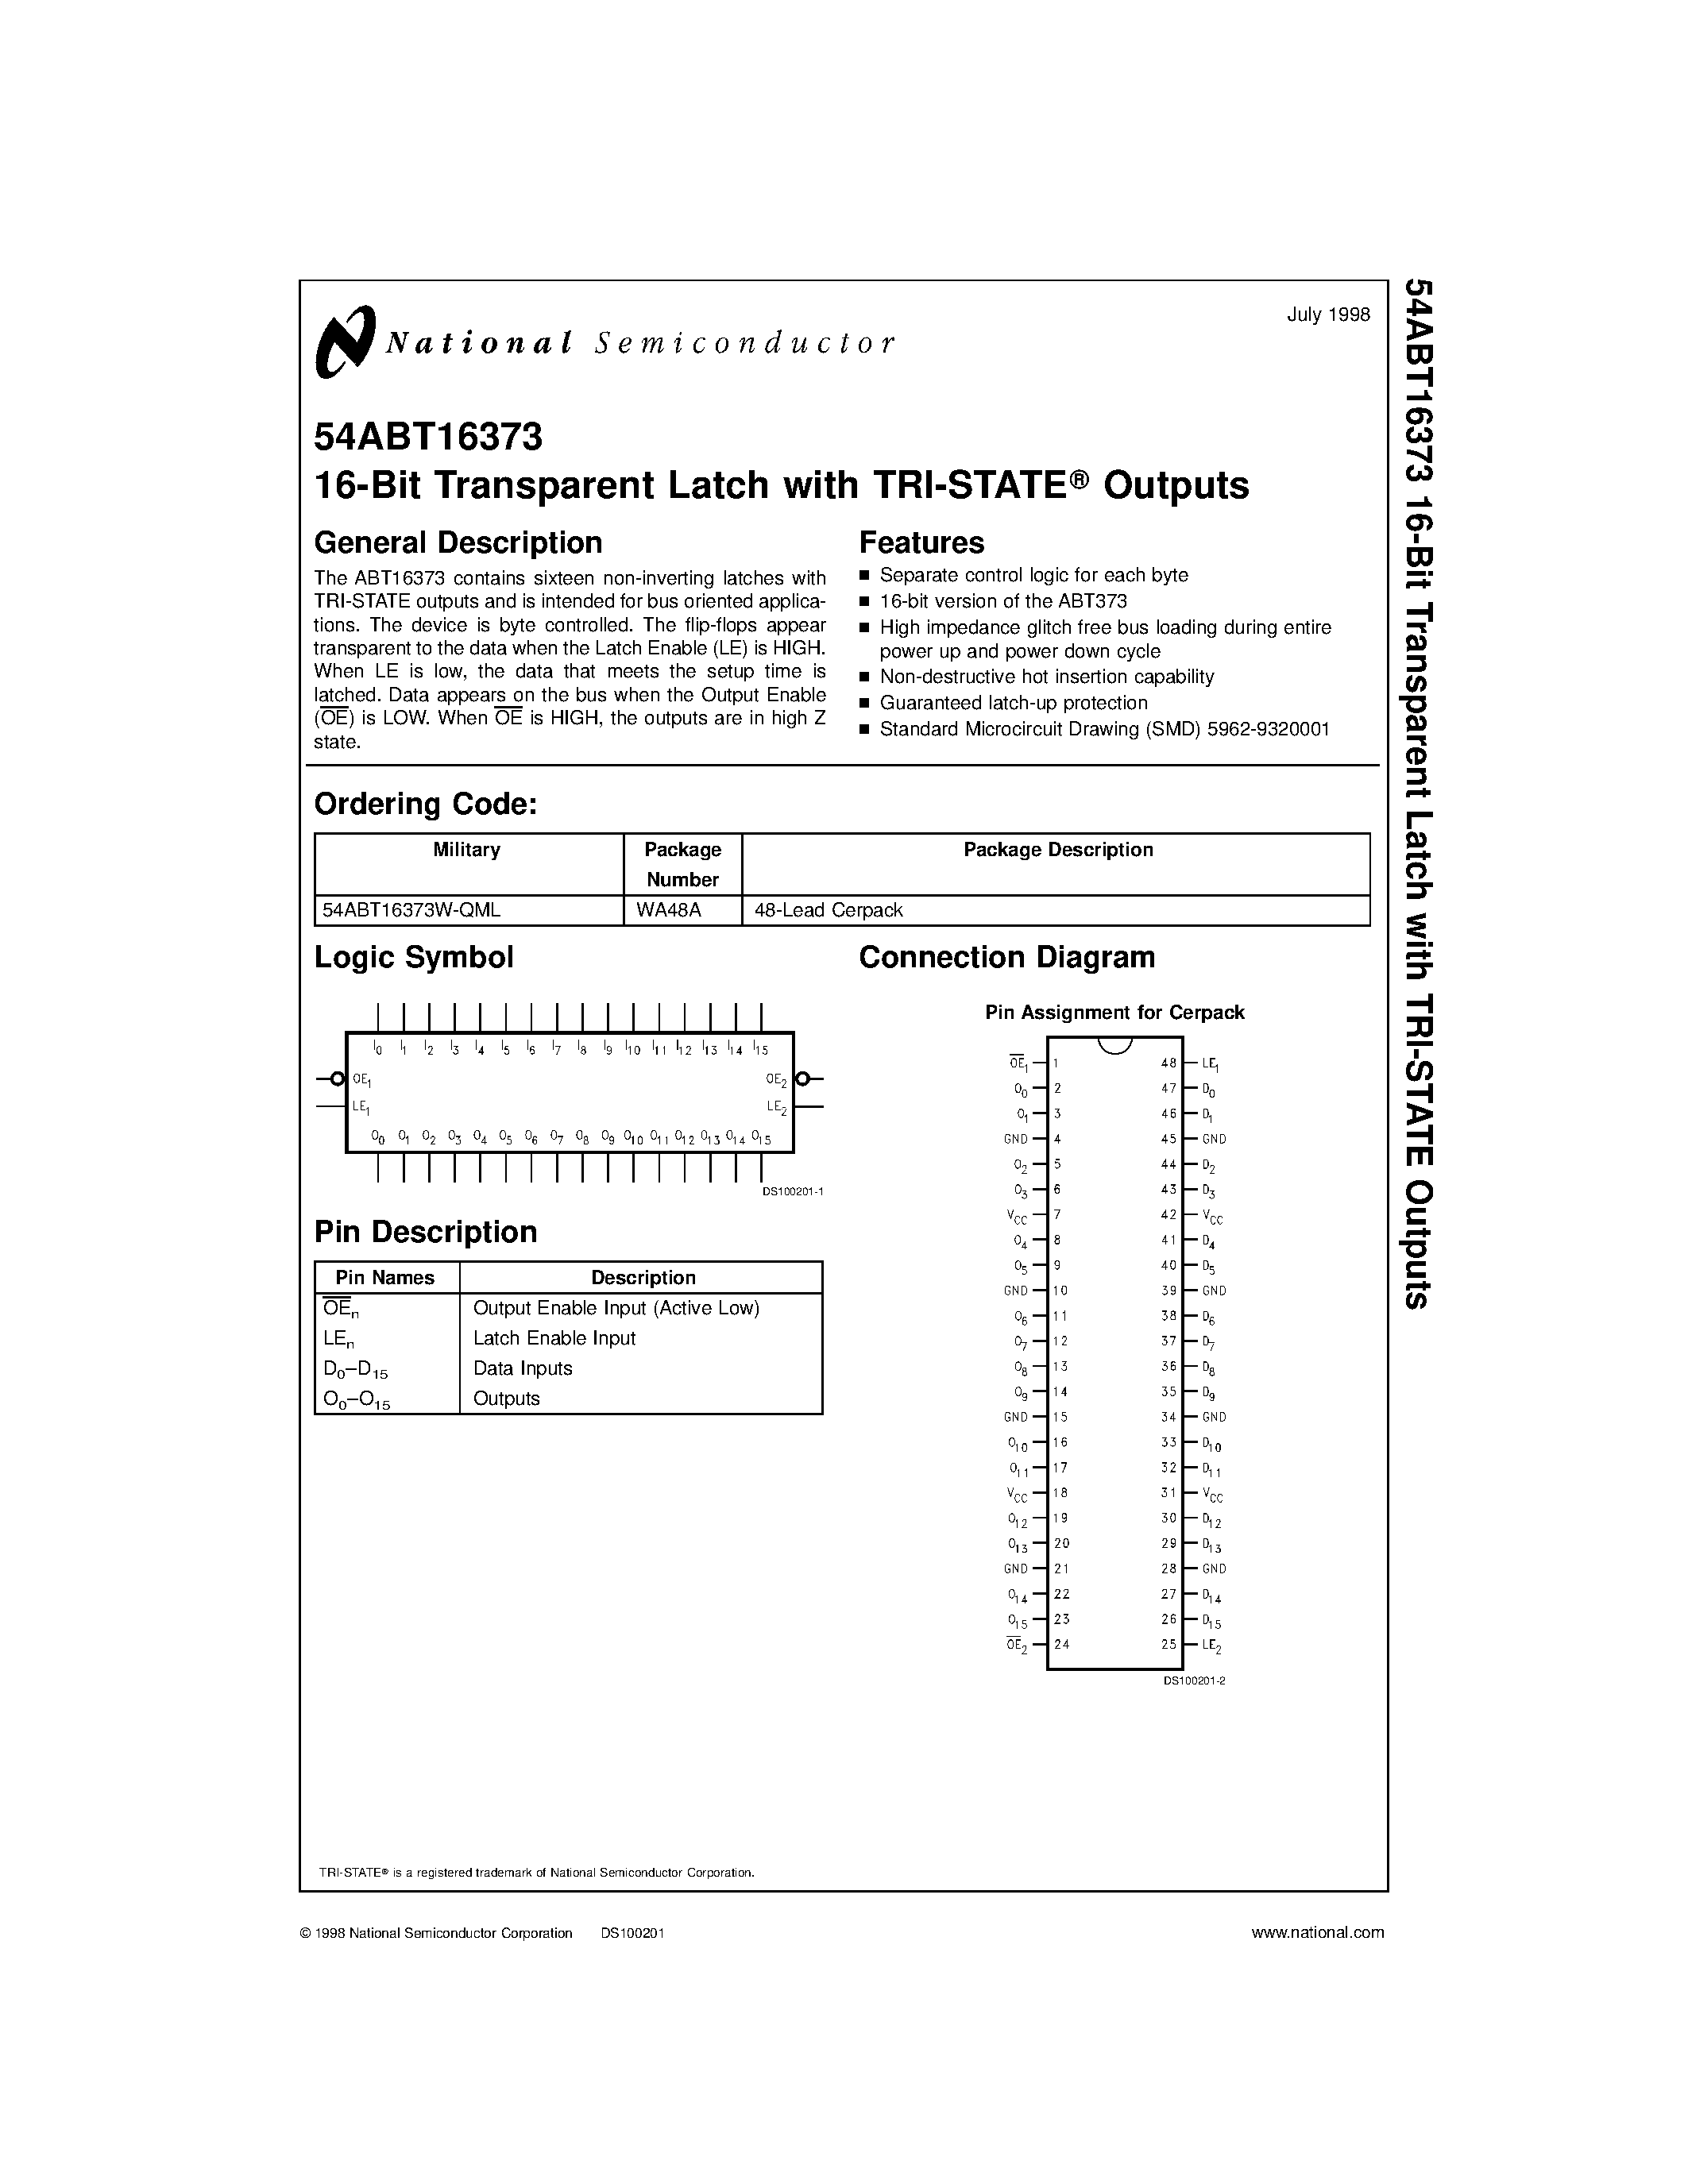 Datasheet 54ABT16373W-QML - 16-Bit Transparent Latch with TRI-STATE Outputs page 1